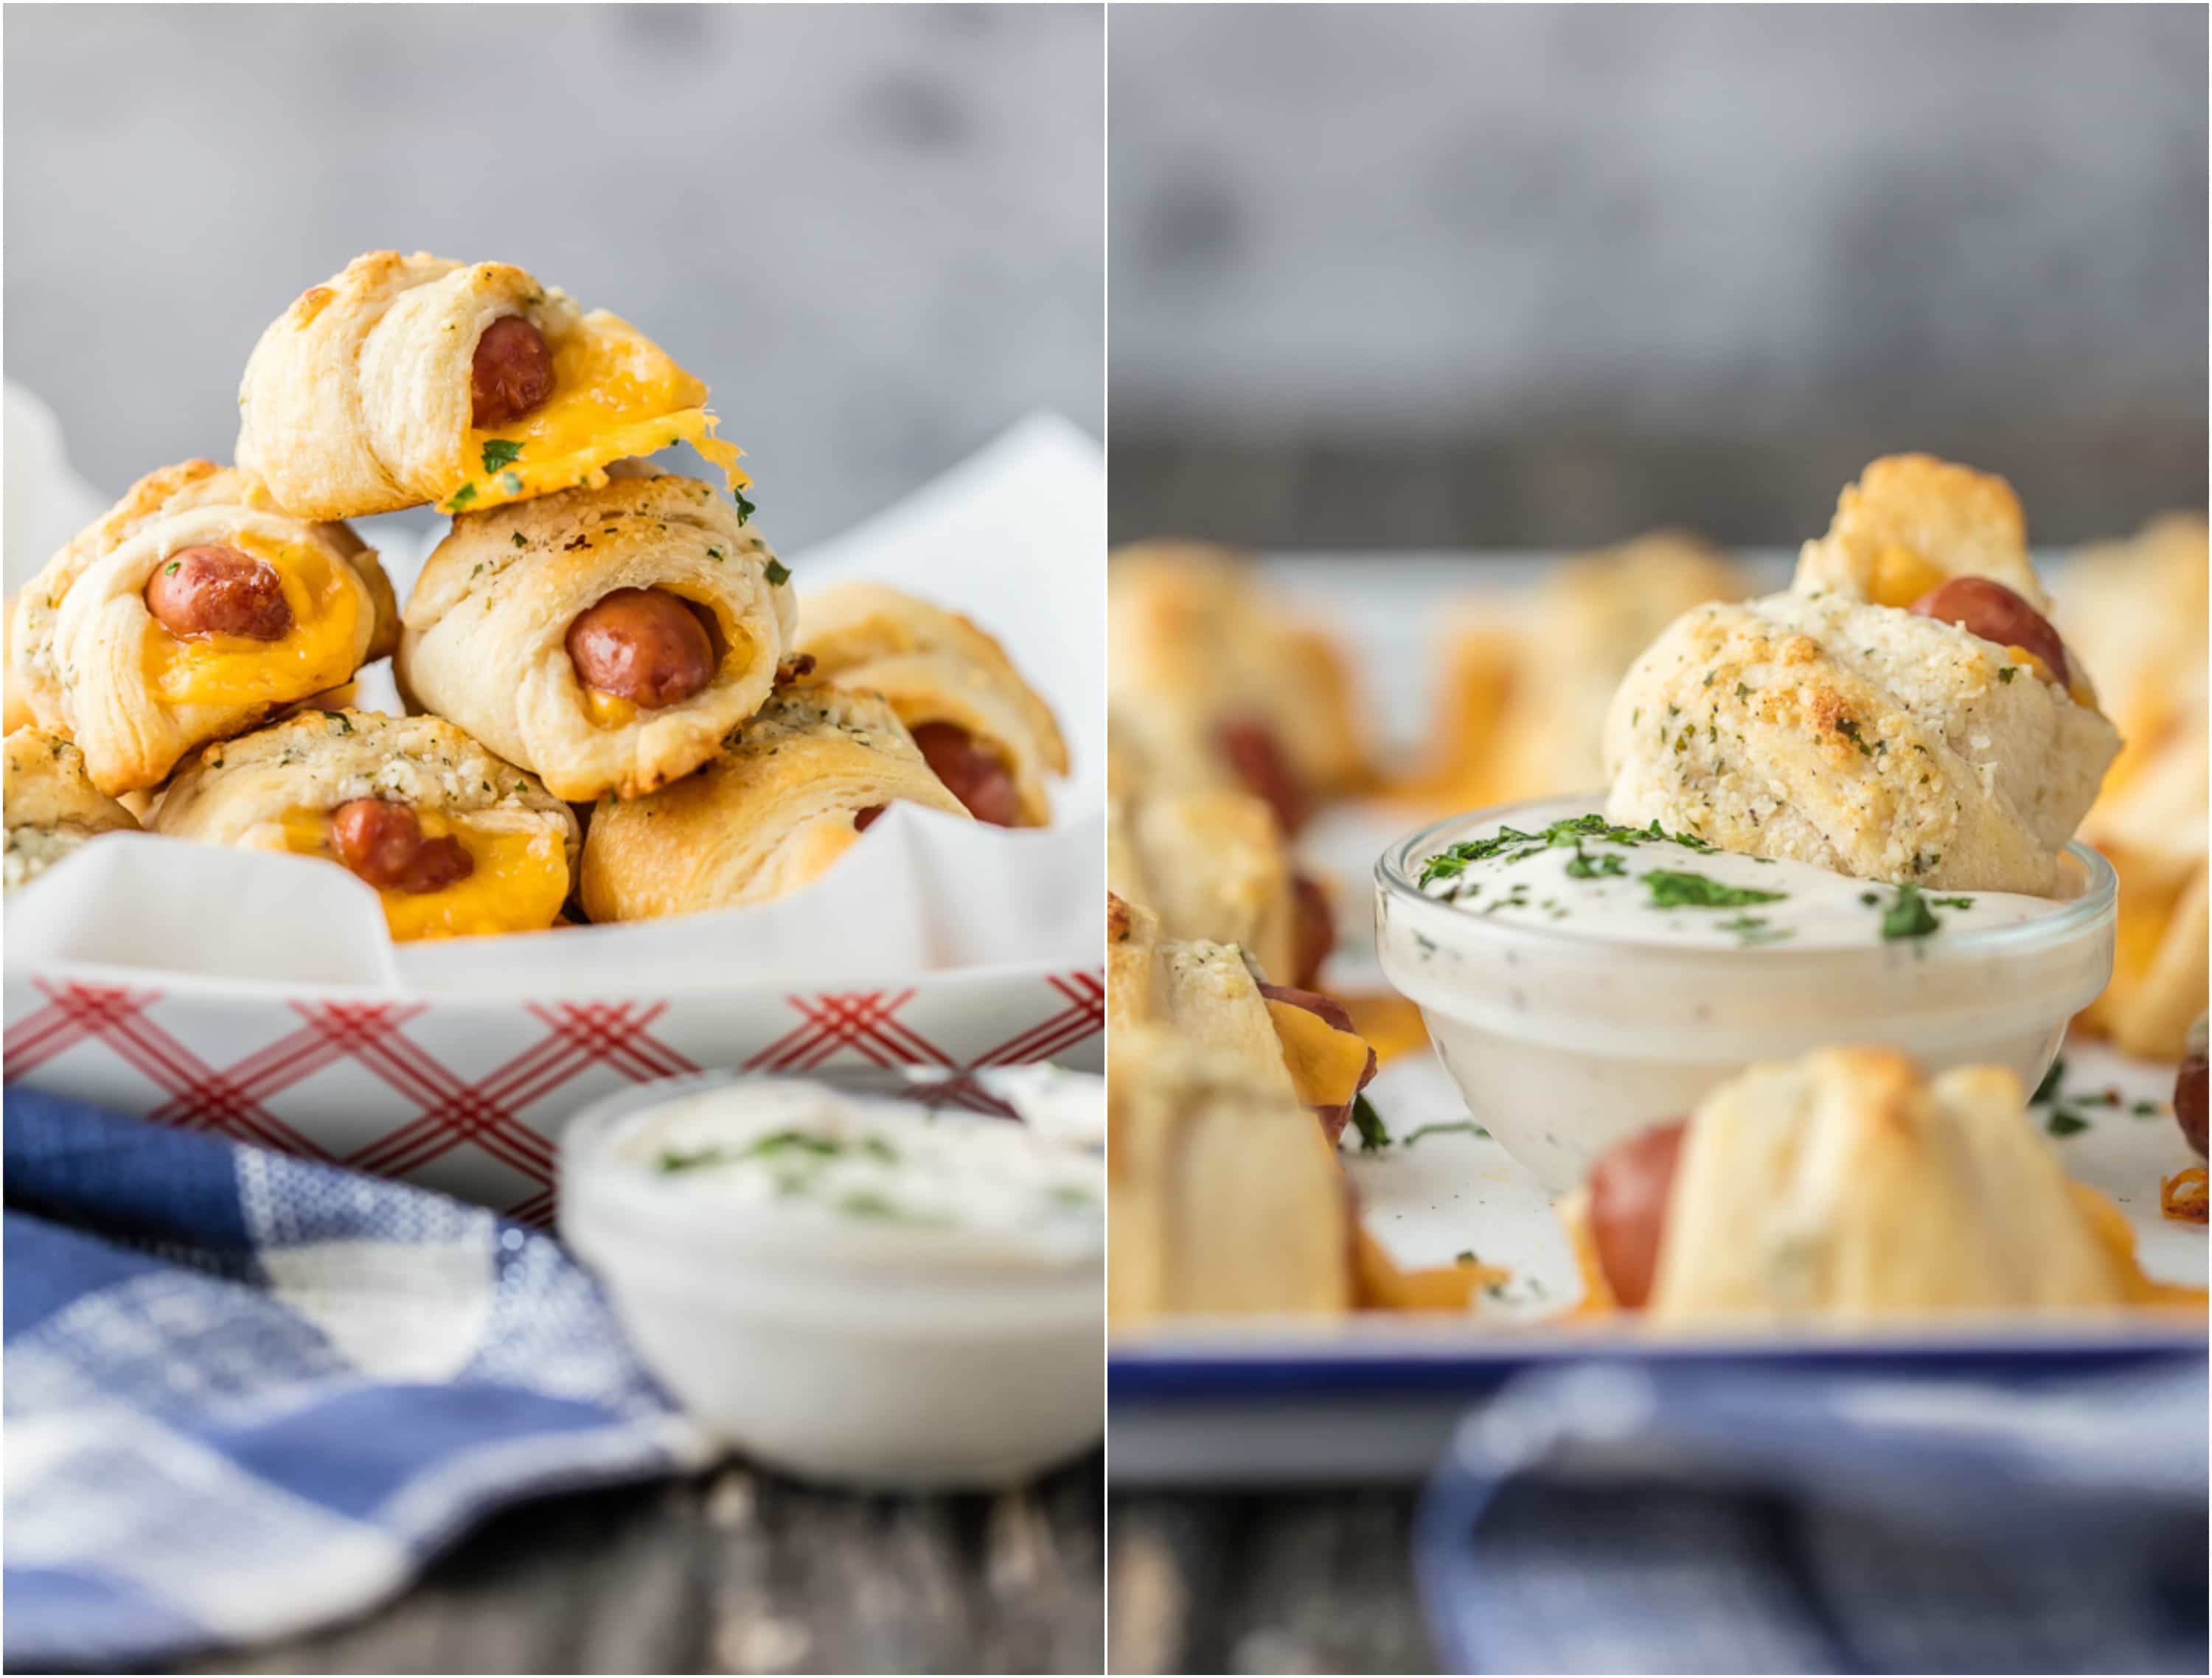 Pigs in a Blanket with Cheese and Parmesan Ranch Butter will be all the rage at your next party. This Pigs in a Blanket Recipe is easy, fun, and oh so delicious. If you've wondered How to Make Pigs in a Blanket, these Lil' Smokies wrapped in sharp cheddar, crescent roll dough, and brushed with parmesan ranch butter are sure to be a hit.